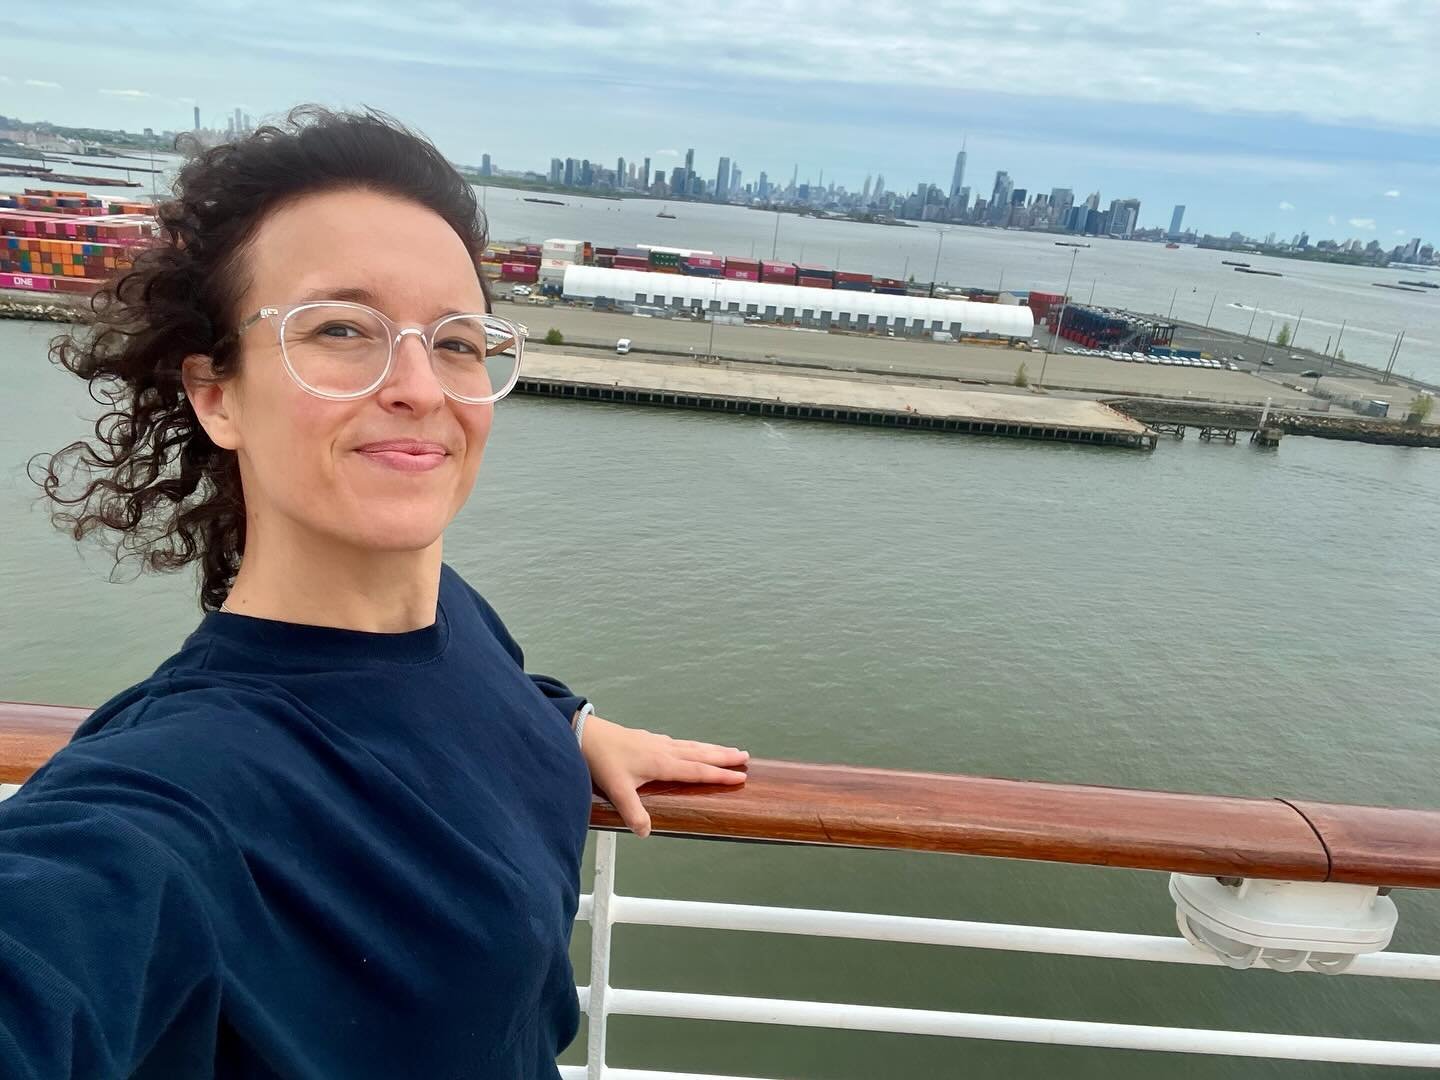 Your girl made it to NYC! I&rsquo;m now on board the Liberty of the Seas &amp; enjoying a view of the city behind me. Here&rsquo;s to another international music adventure! ❤️🗽#cruiselife #musician #newyork #adventure